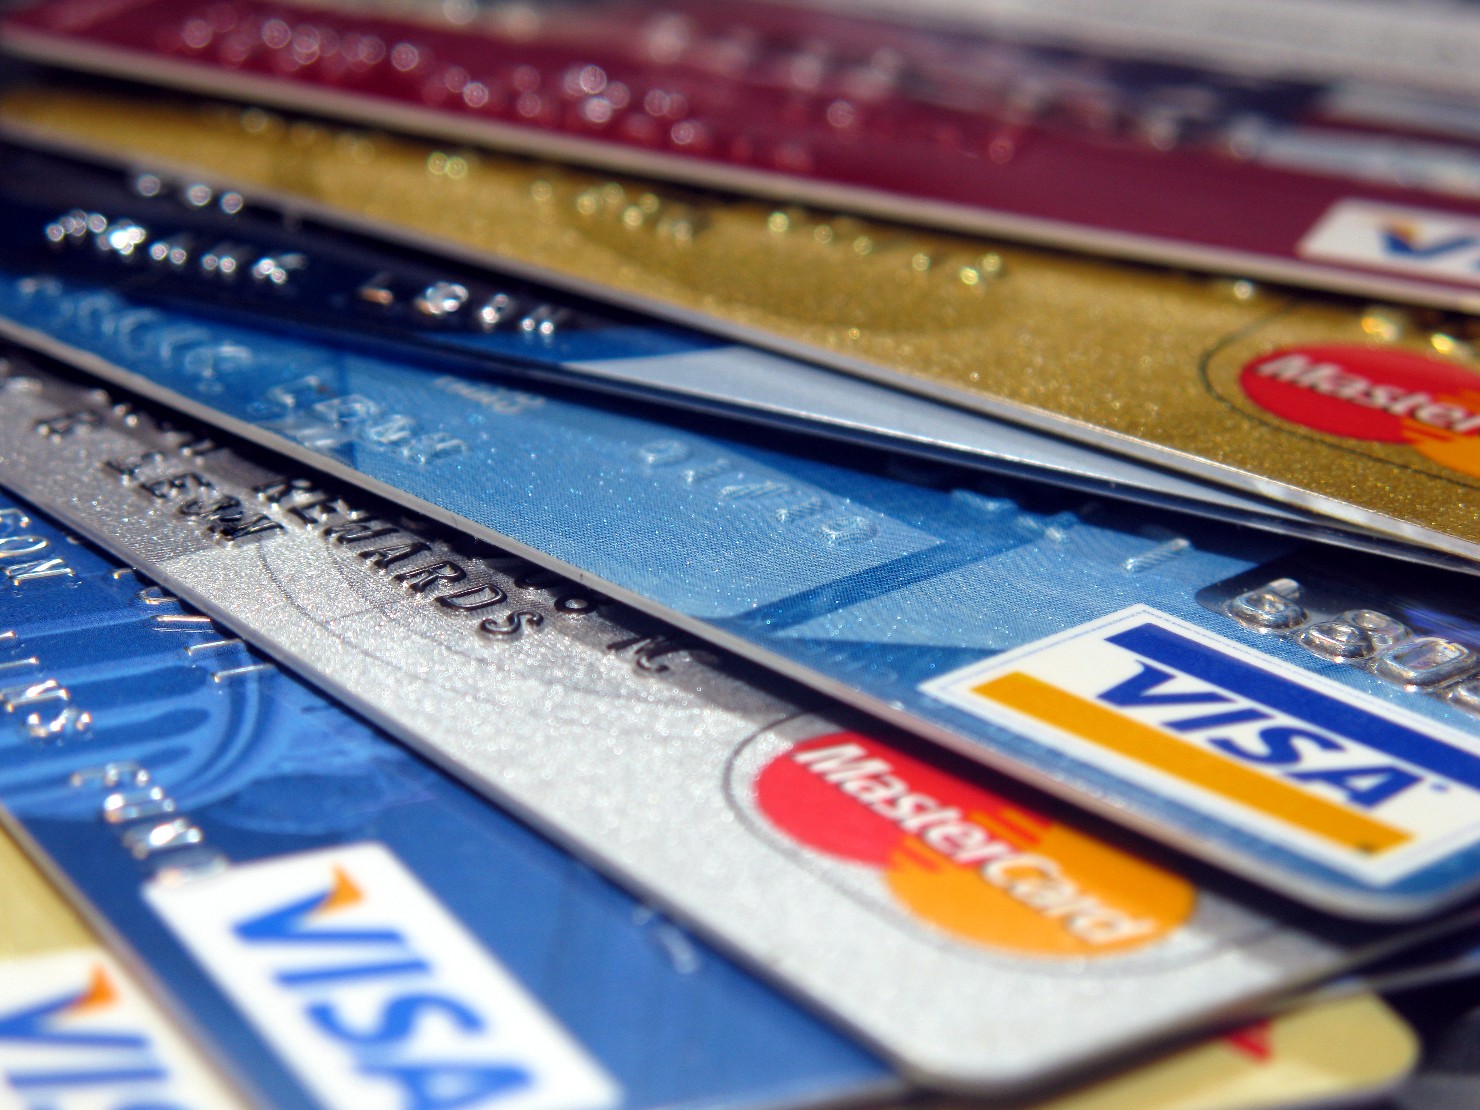 Fanned out credit cards